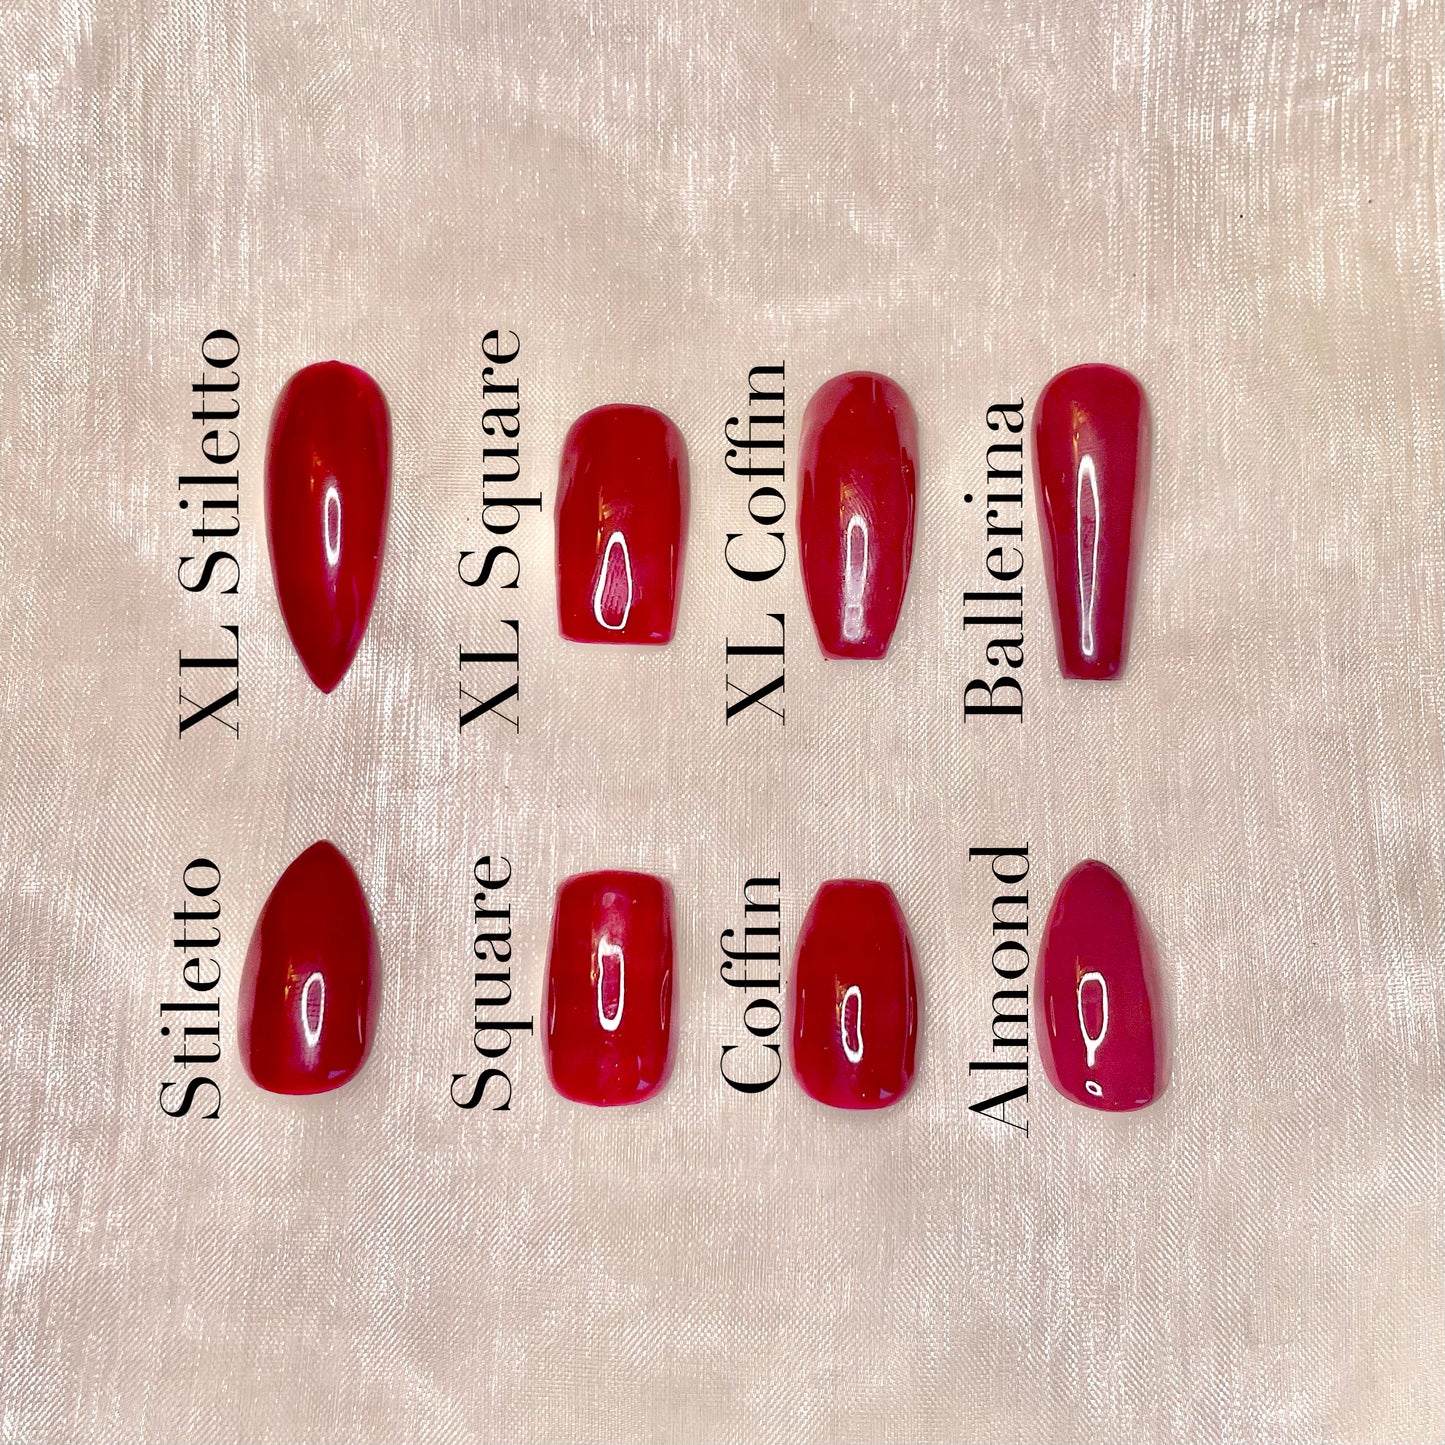 Matte Berry Red, Chrome and Marble Stilettos